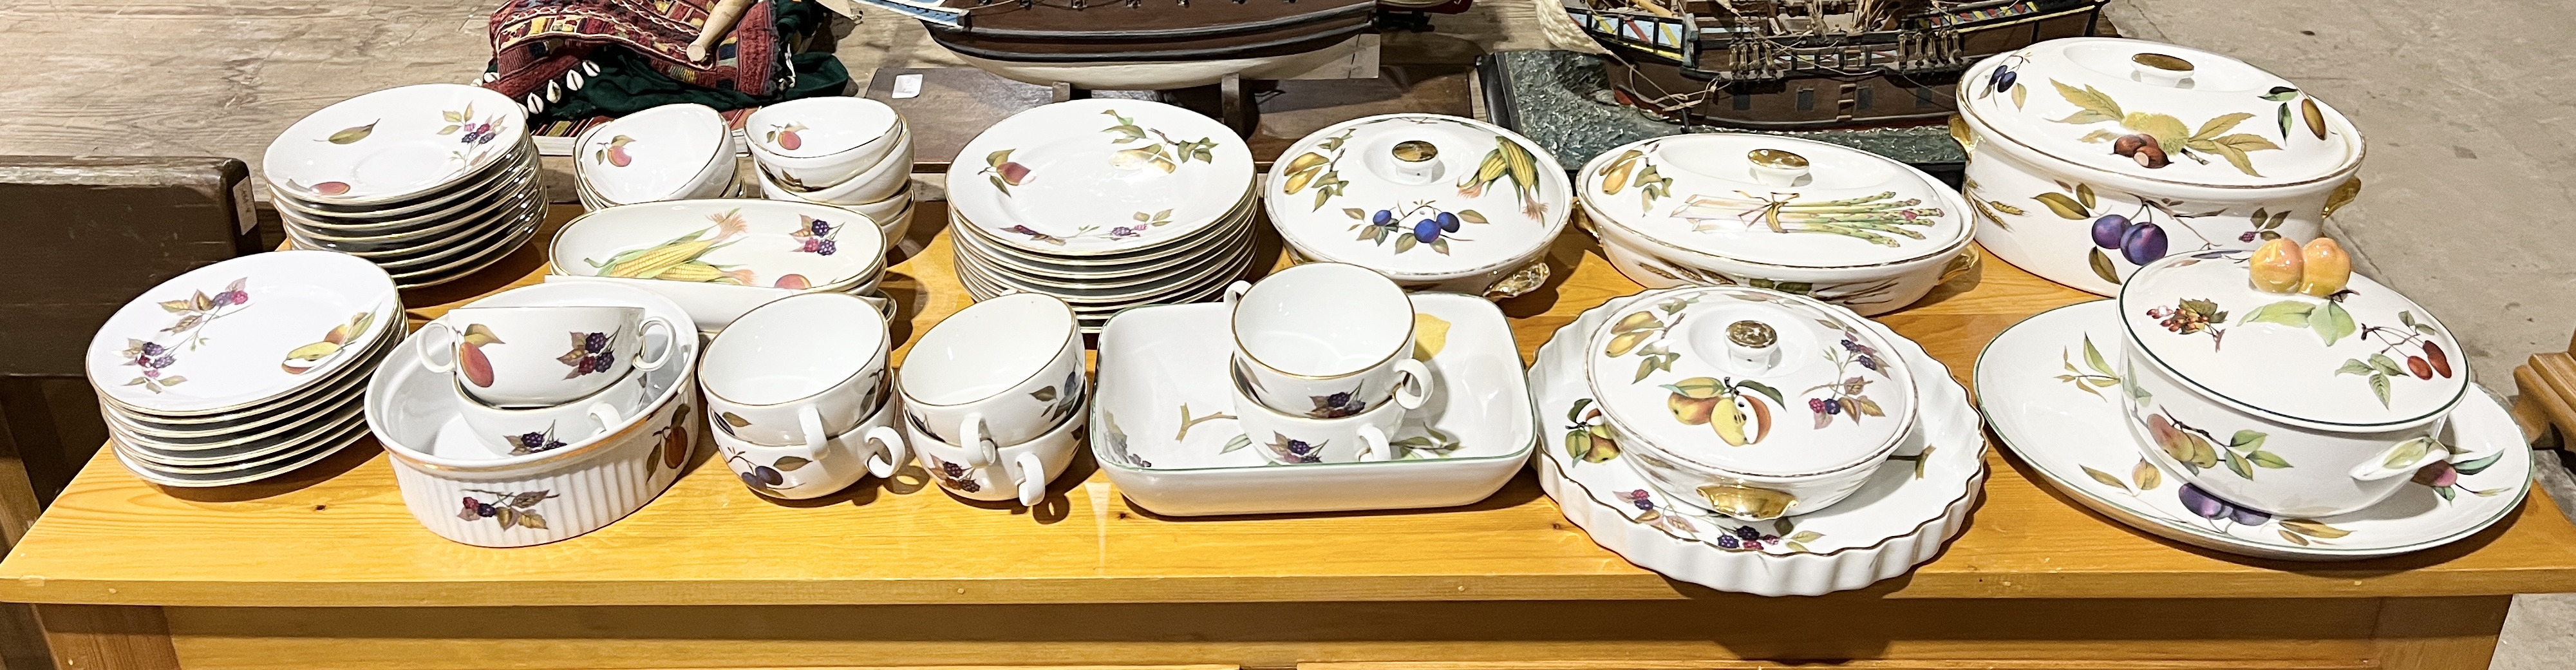 A large collection of Royal Worcester "Evesham" dinner ware including plates, bowls, terrines etc.